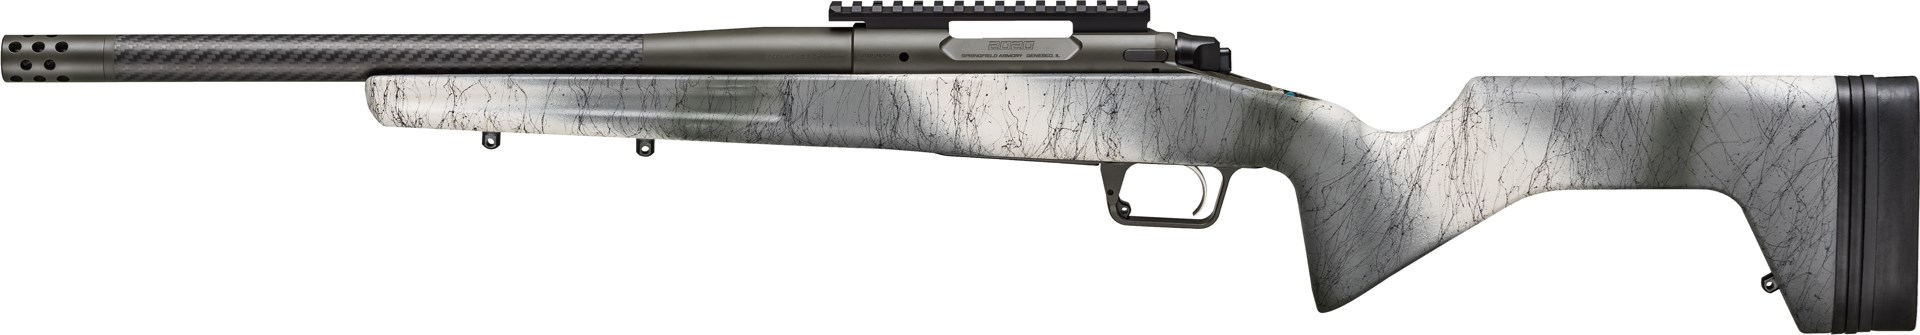 Springfield Armory Model 2020 Redline bolt-action rifle olive camouflage green Cerakote receiver carbon-fiber-wrapped barrel left-side view on white hunting rifle